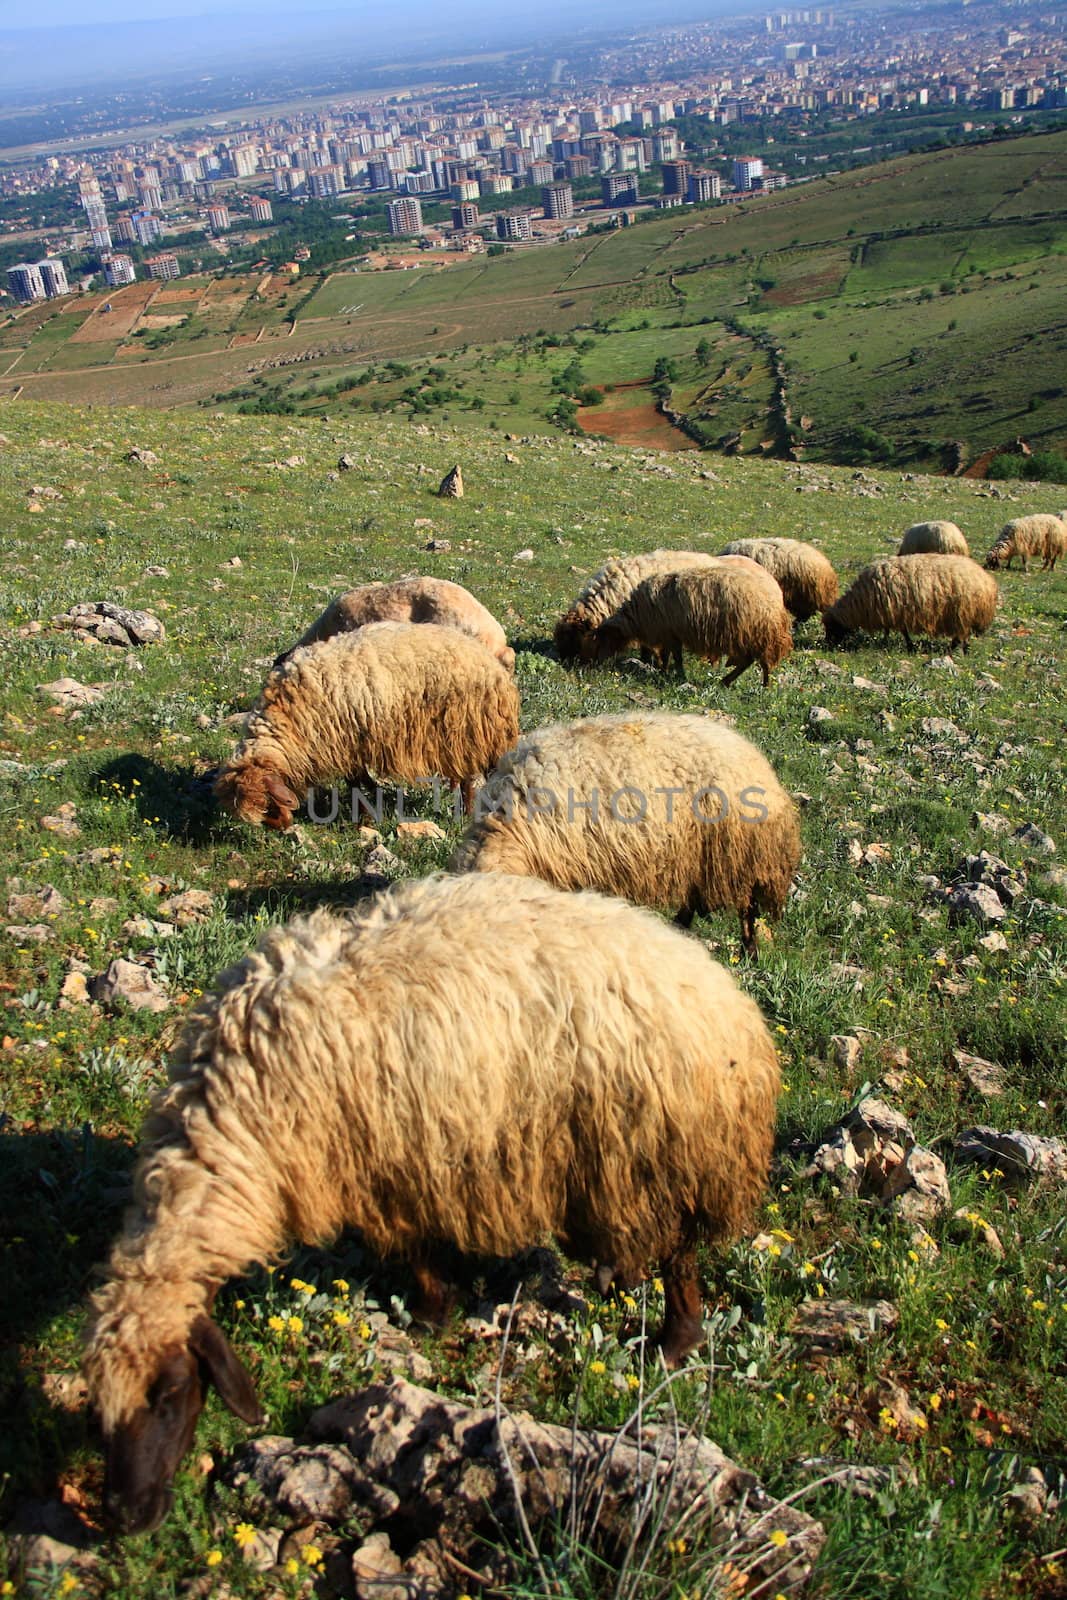 sheep eating on hill grass on summer day